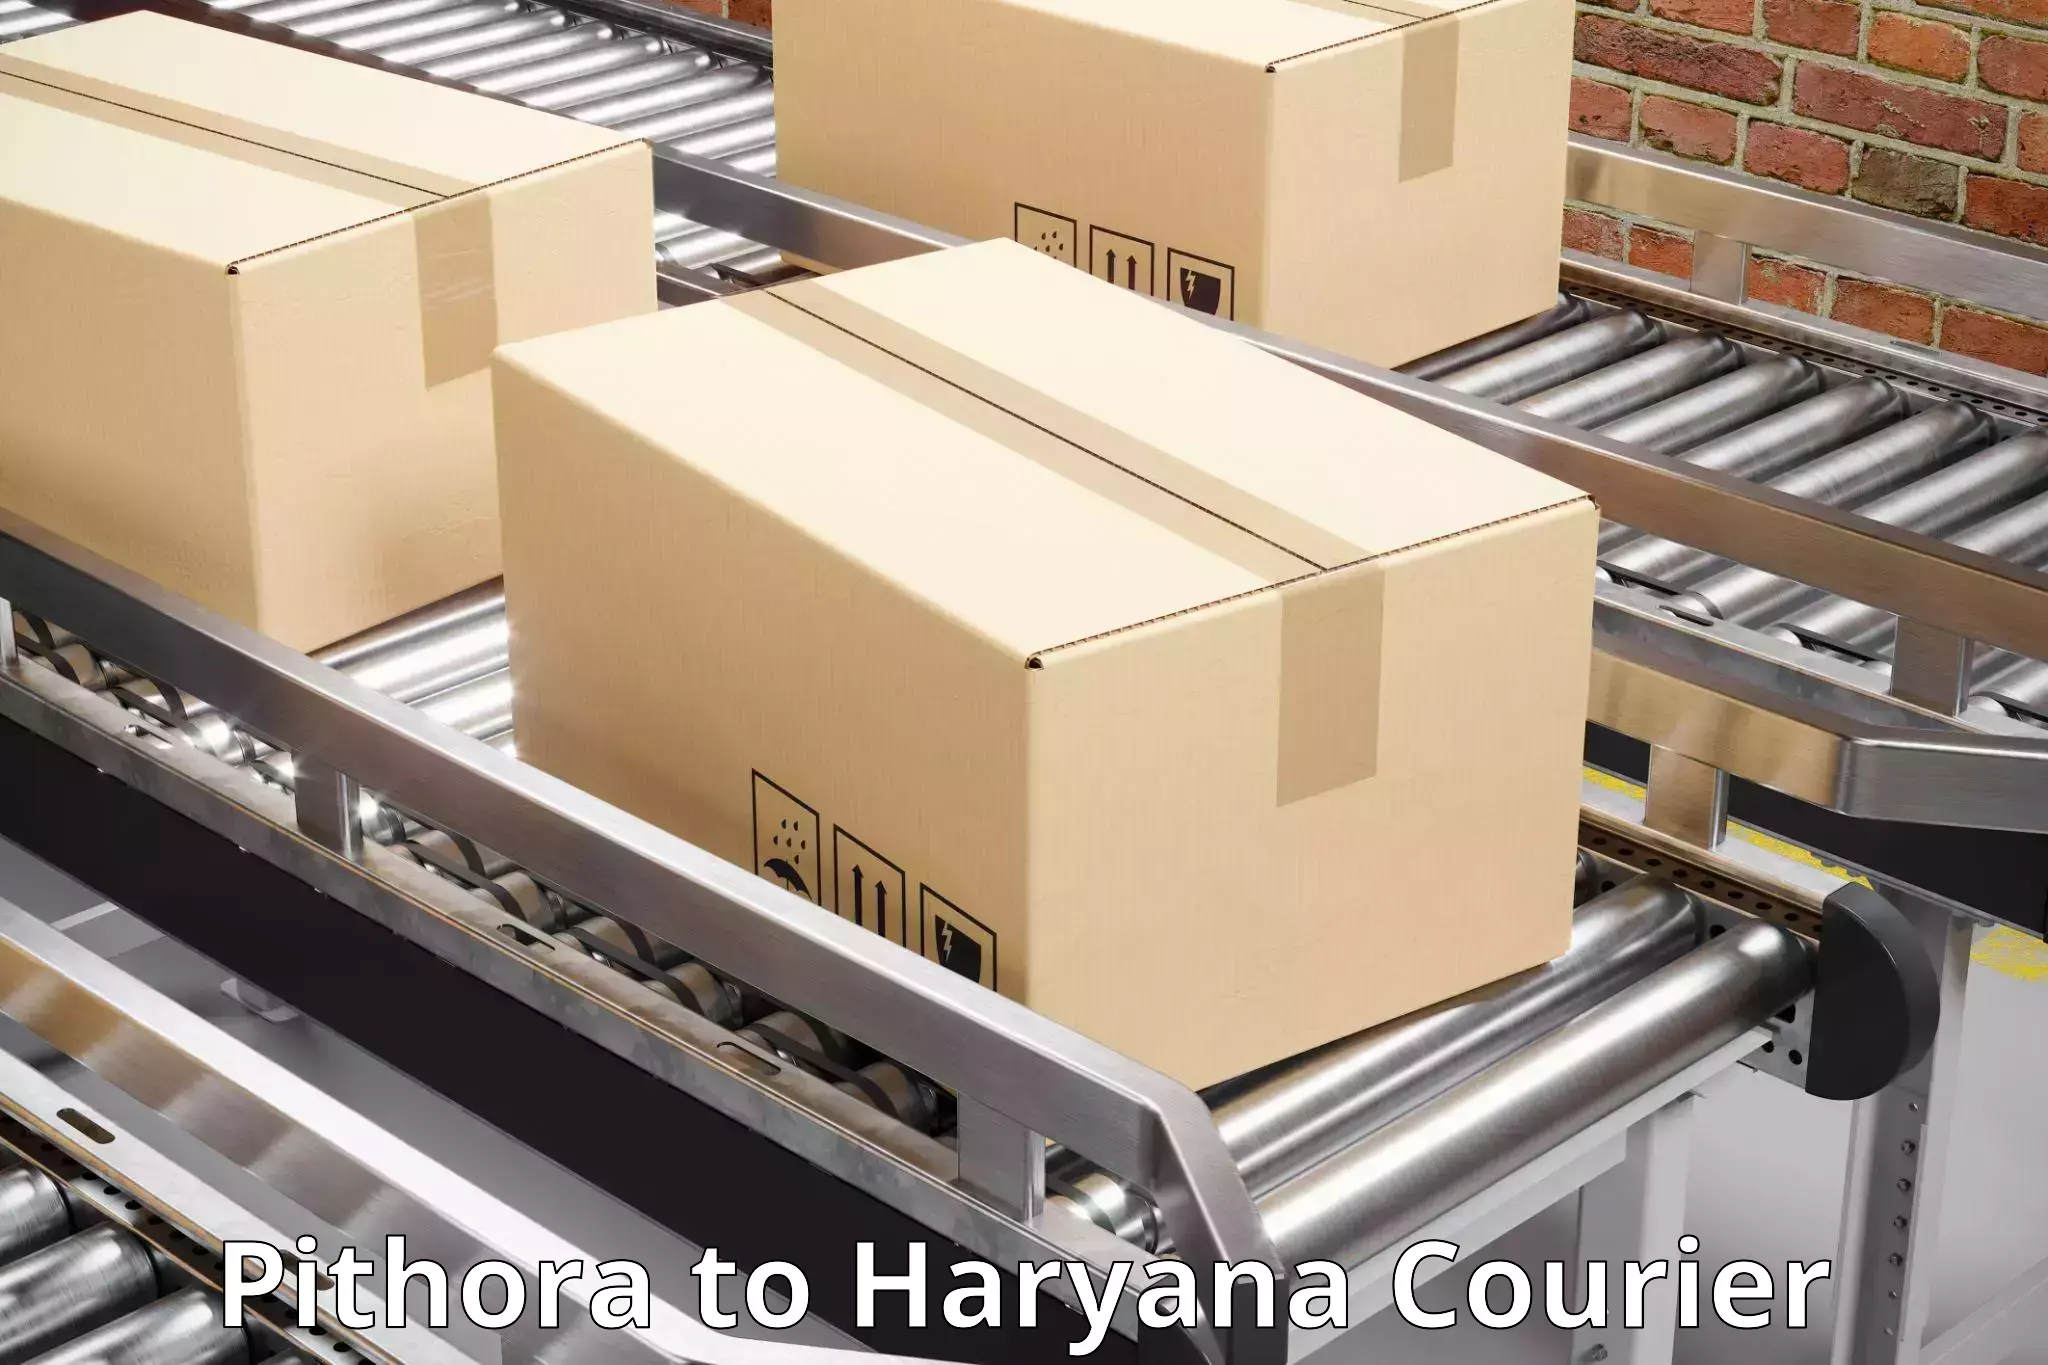 24-hour courier service Pithora to Sonipat